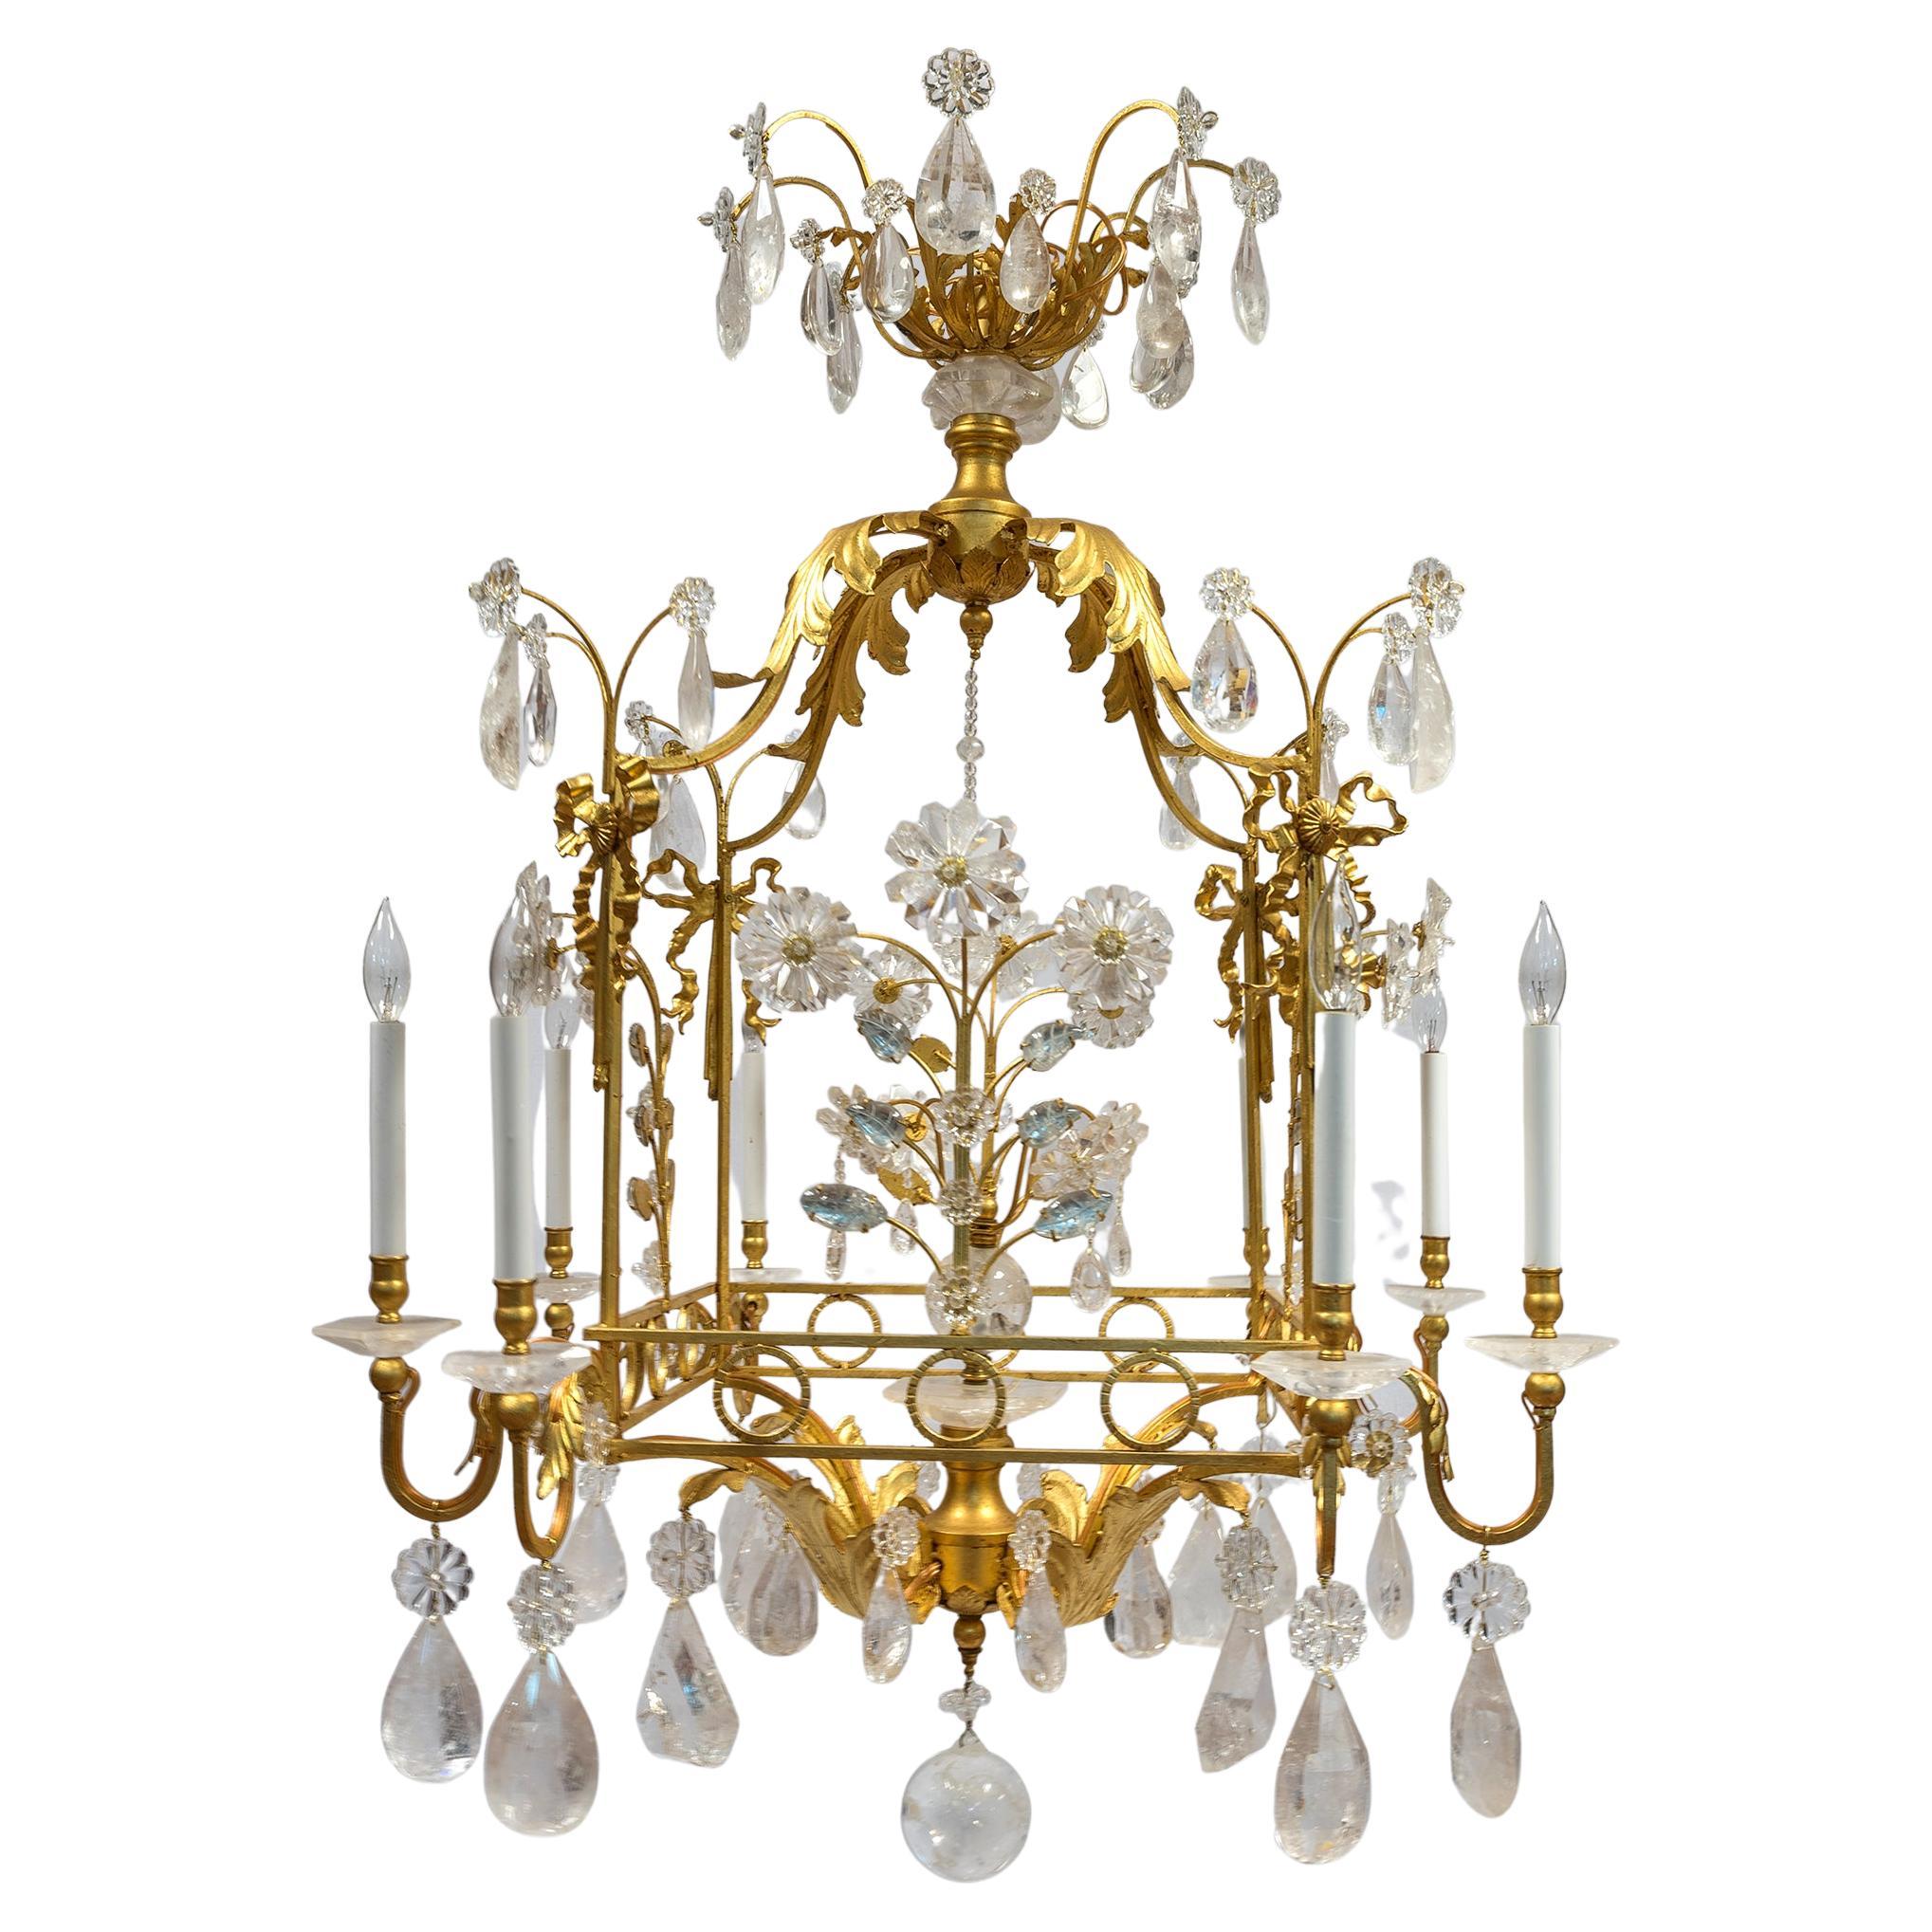  Opulent Rock Crystal Chandelier with foliage and ribbon motif For Sale